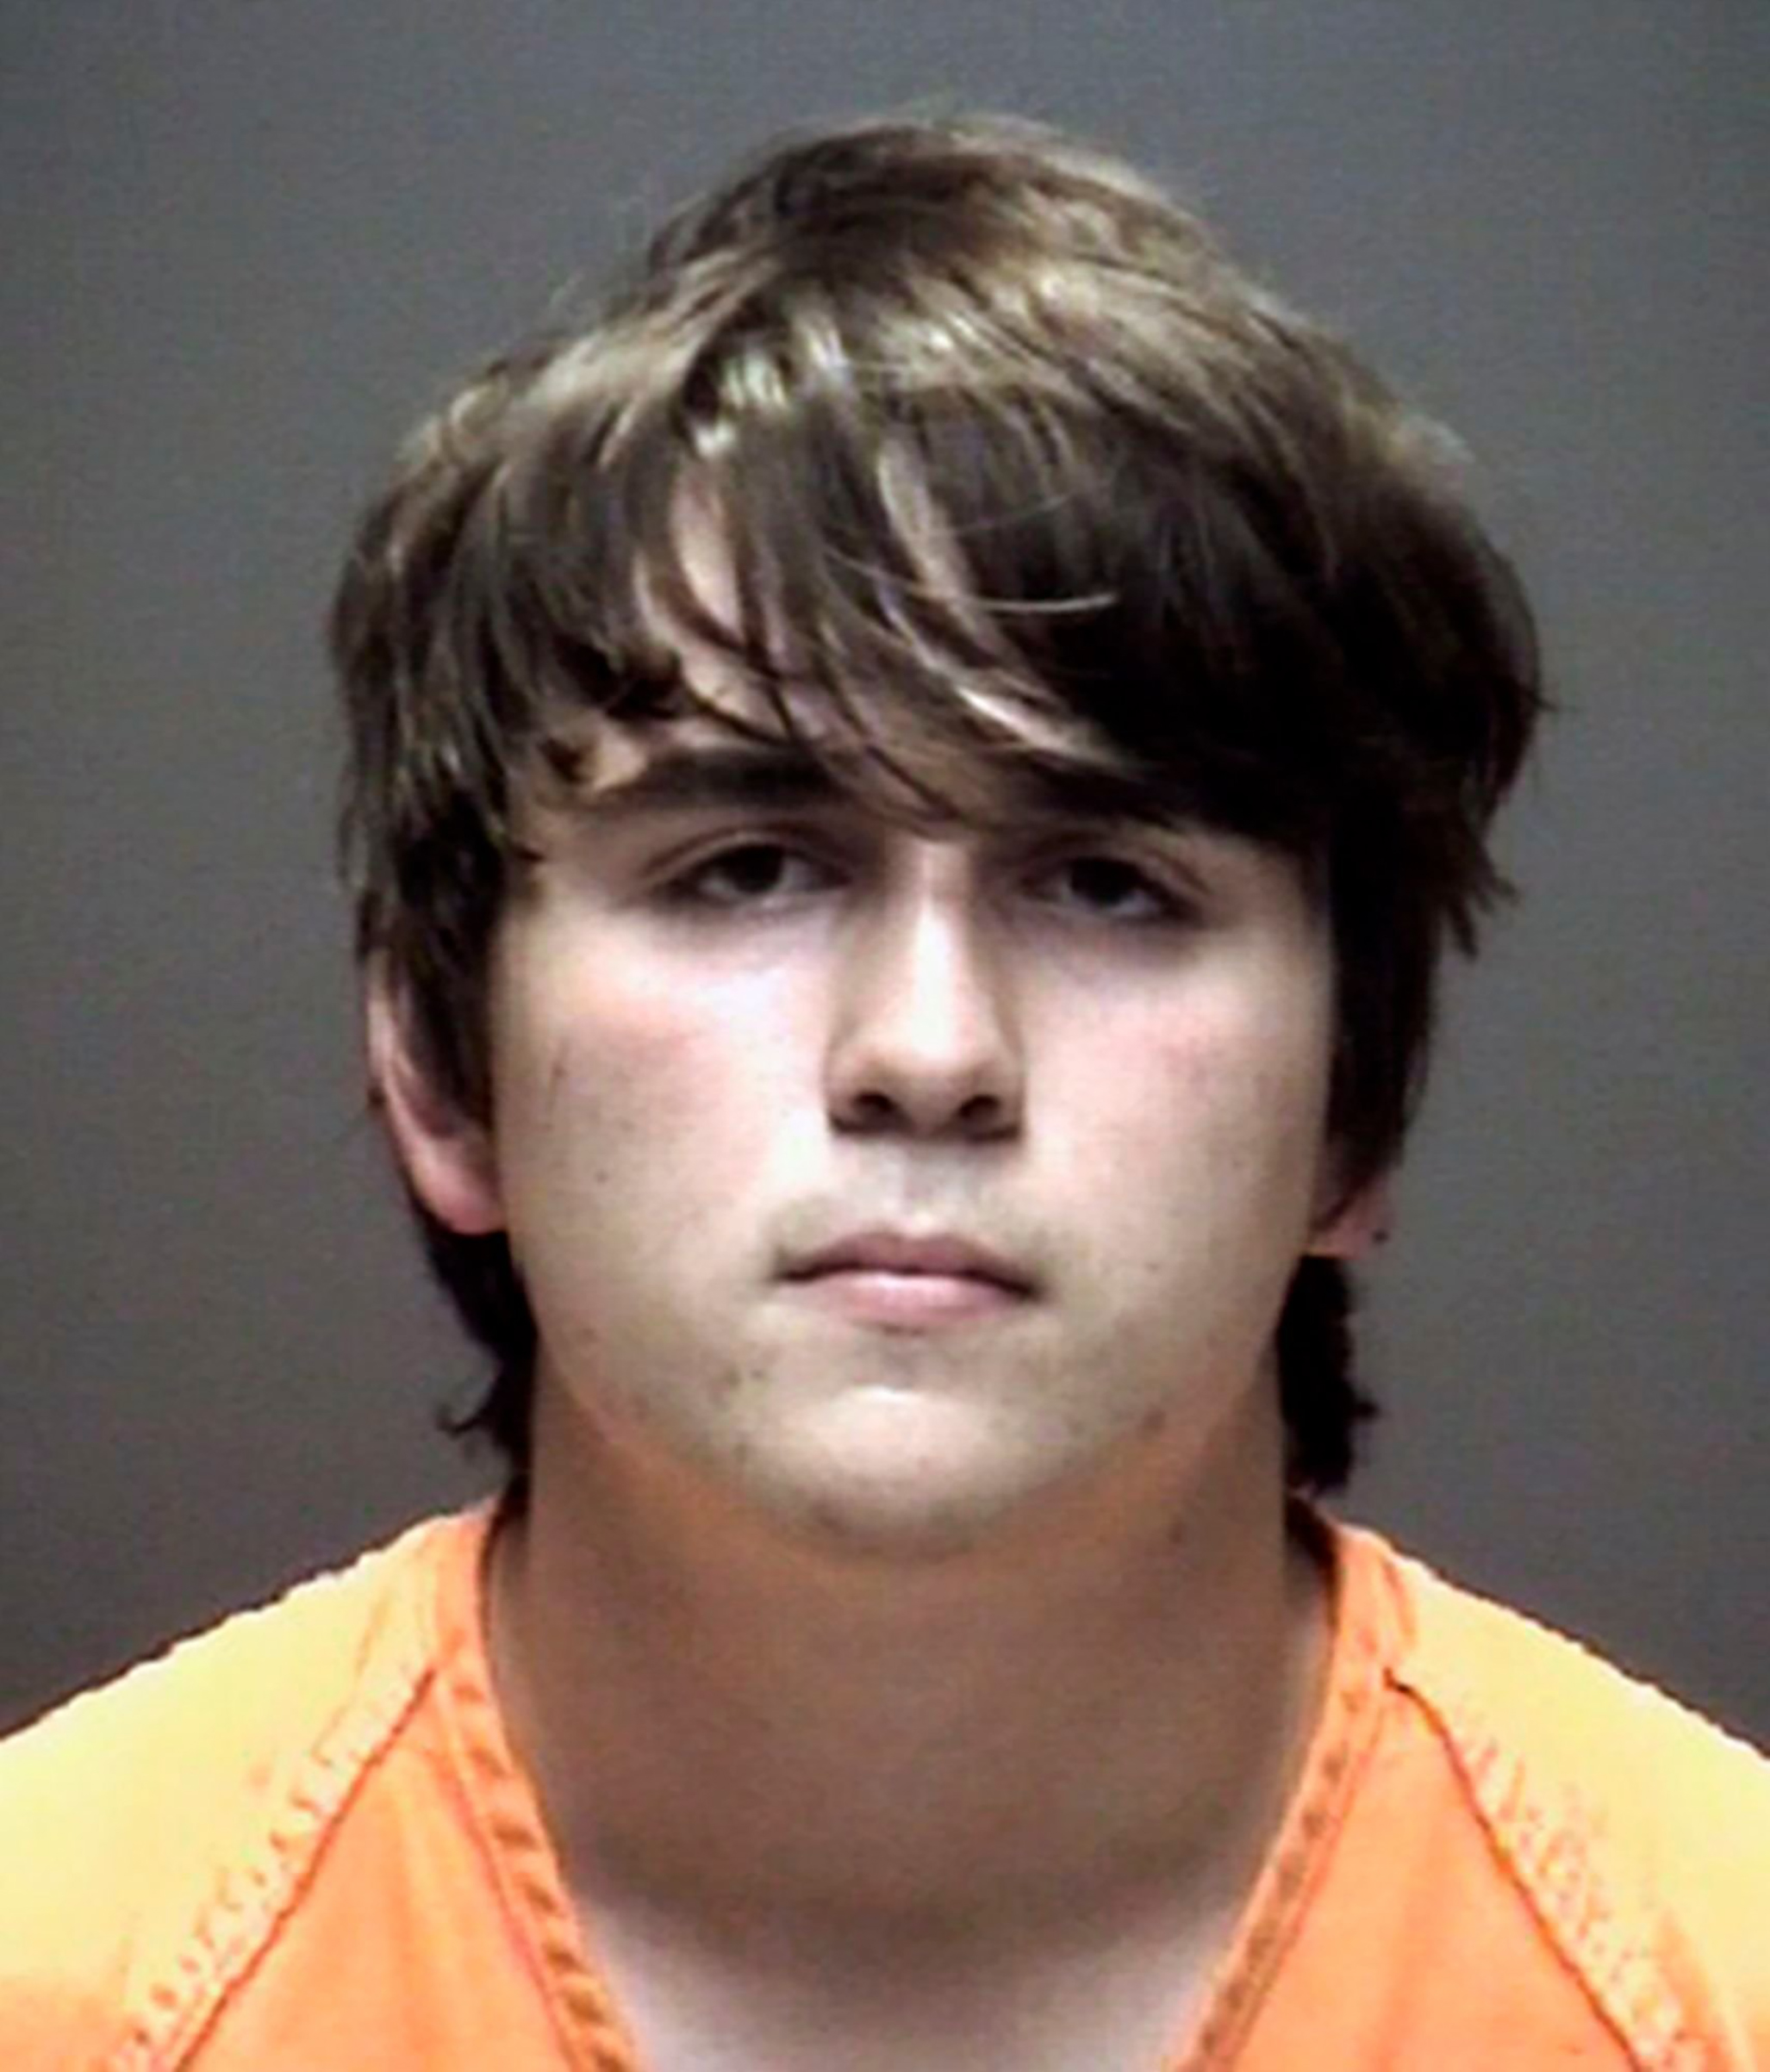 This photo provided by the Galveston County Sheriff's Office shows Dimitrios Pagourtzis, who law enforcement officials took into custody, and identified as the suspect in the deadly school shooting in Santa Fe, Texas, near Houston, on May 18, 2018 (Galveston County Sheriff's Office—AP/Shutterstock)